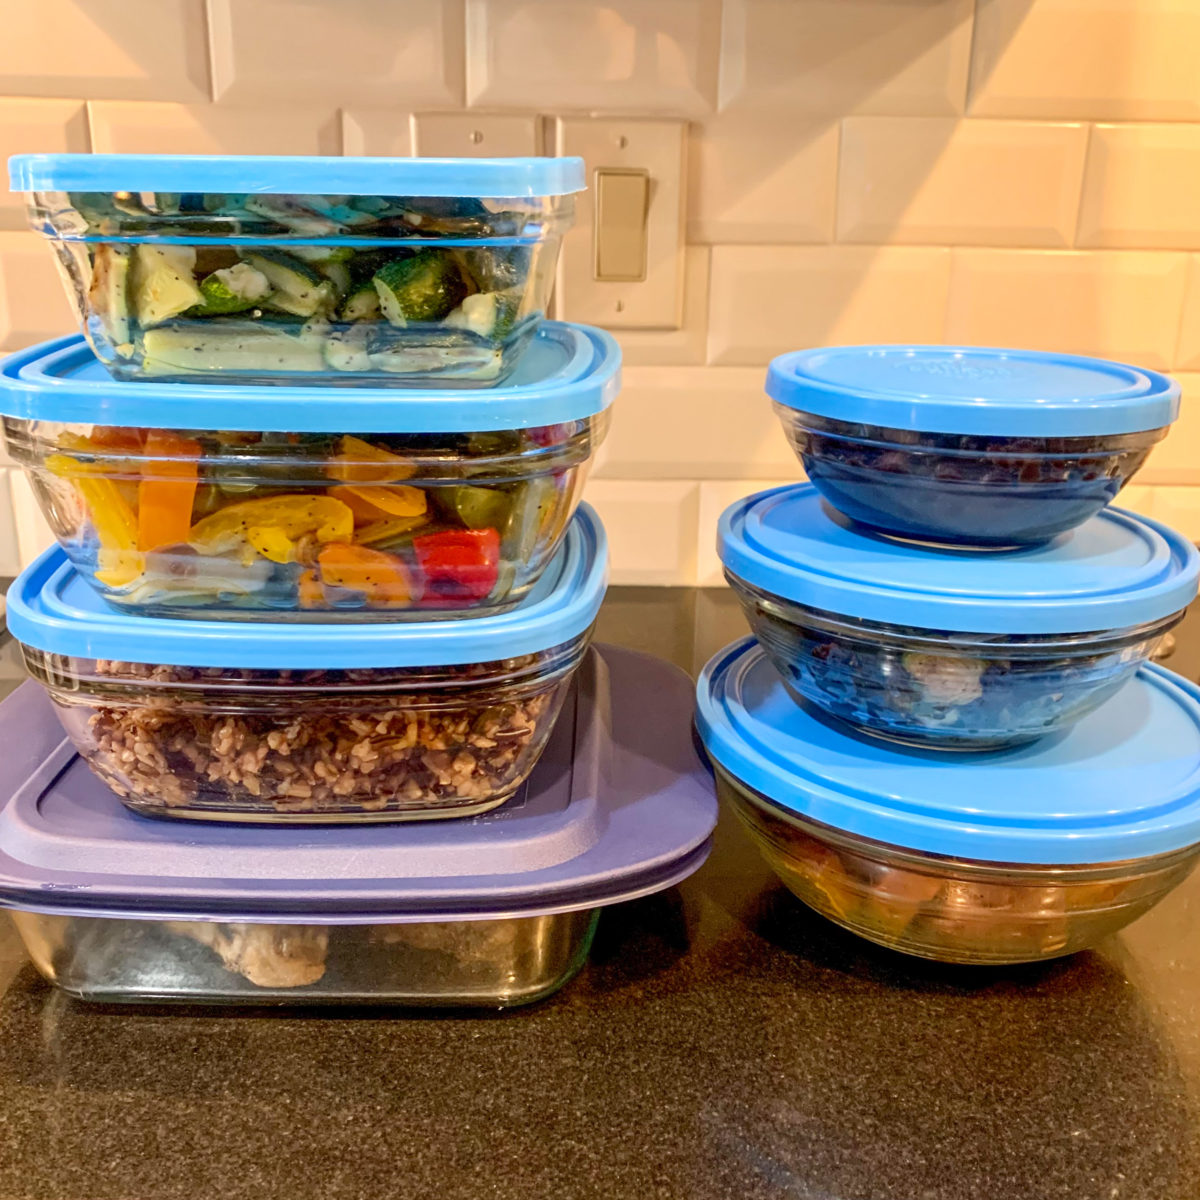 best healthy meal prep recipe for variety every day